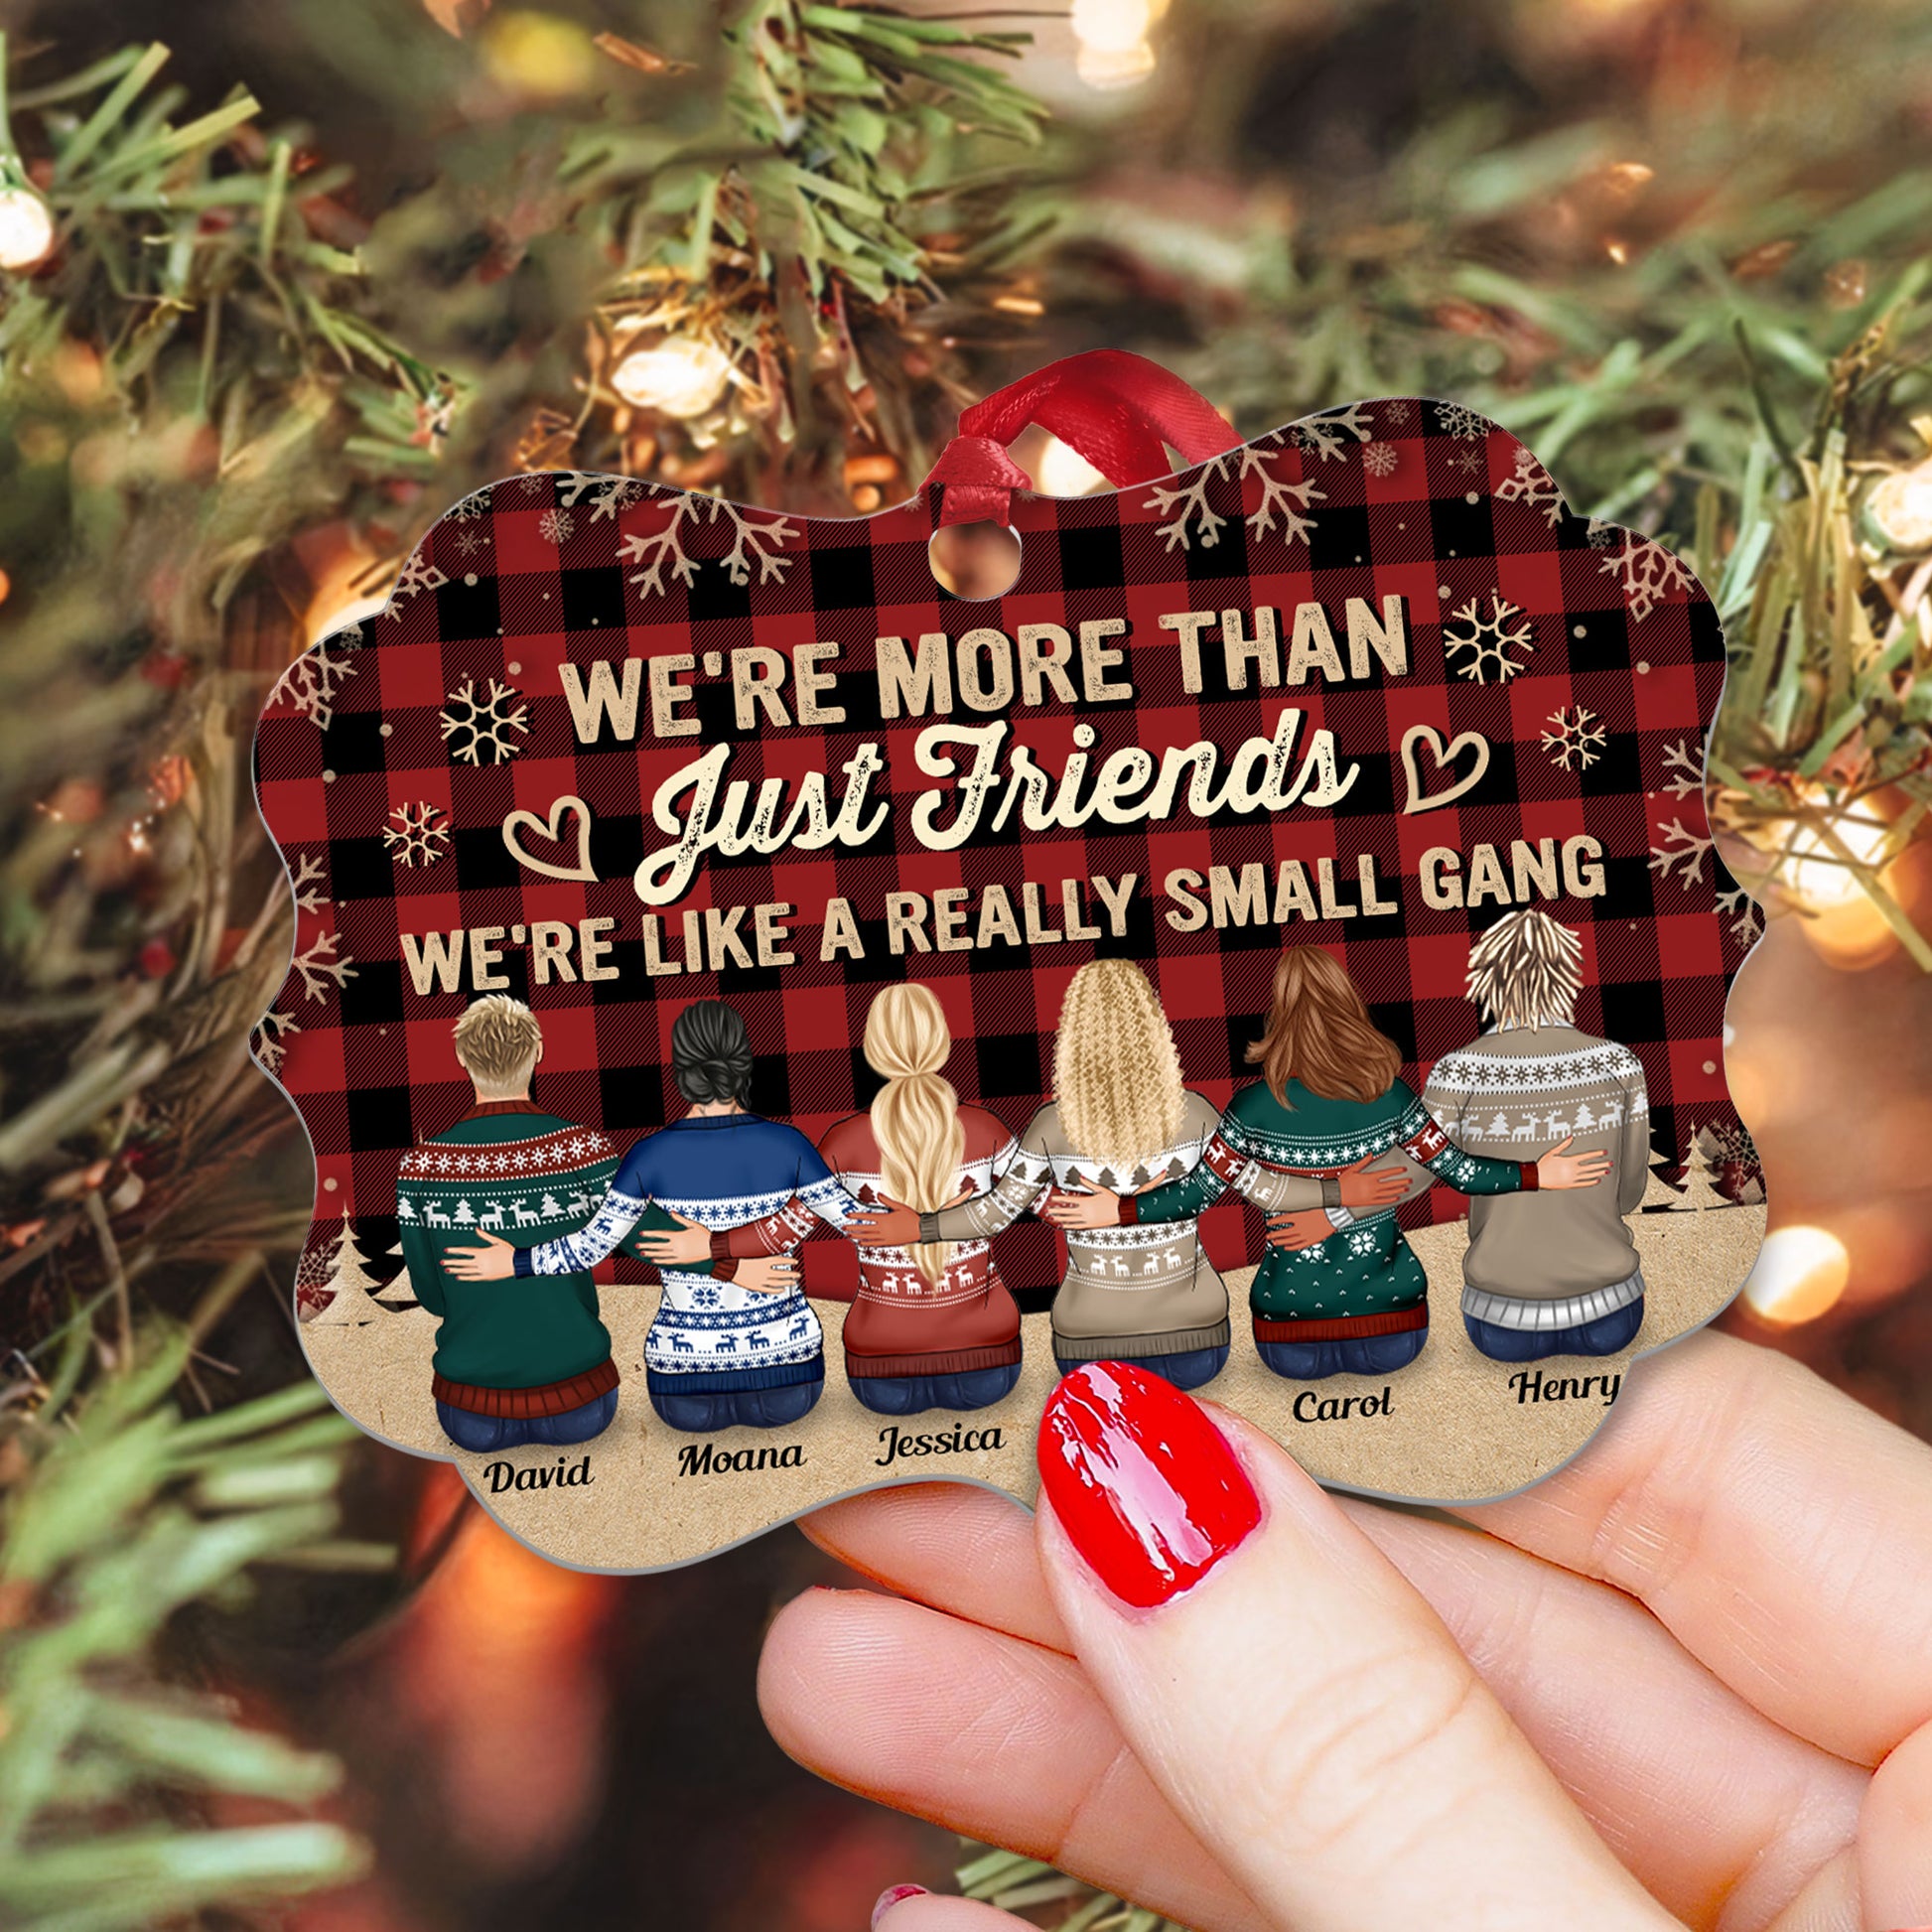 We're Like A Really Small Gang  - Personalized Aluminum Ornament - Christmas Gift For Friends